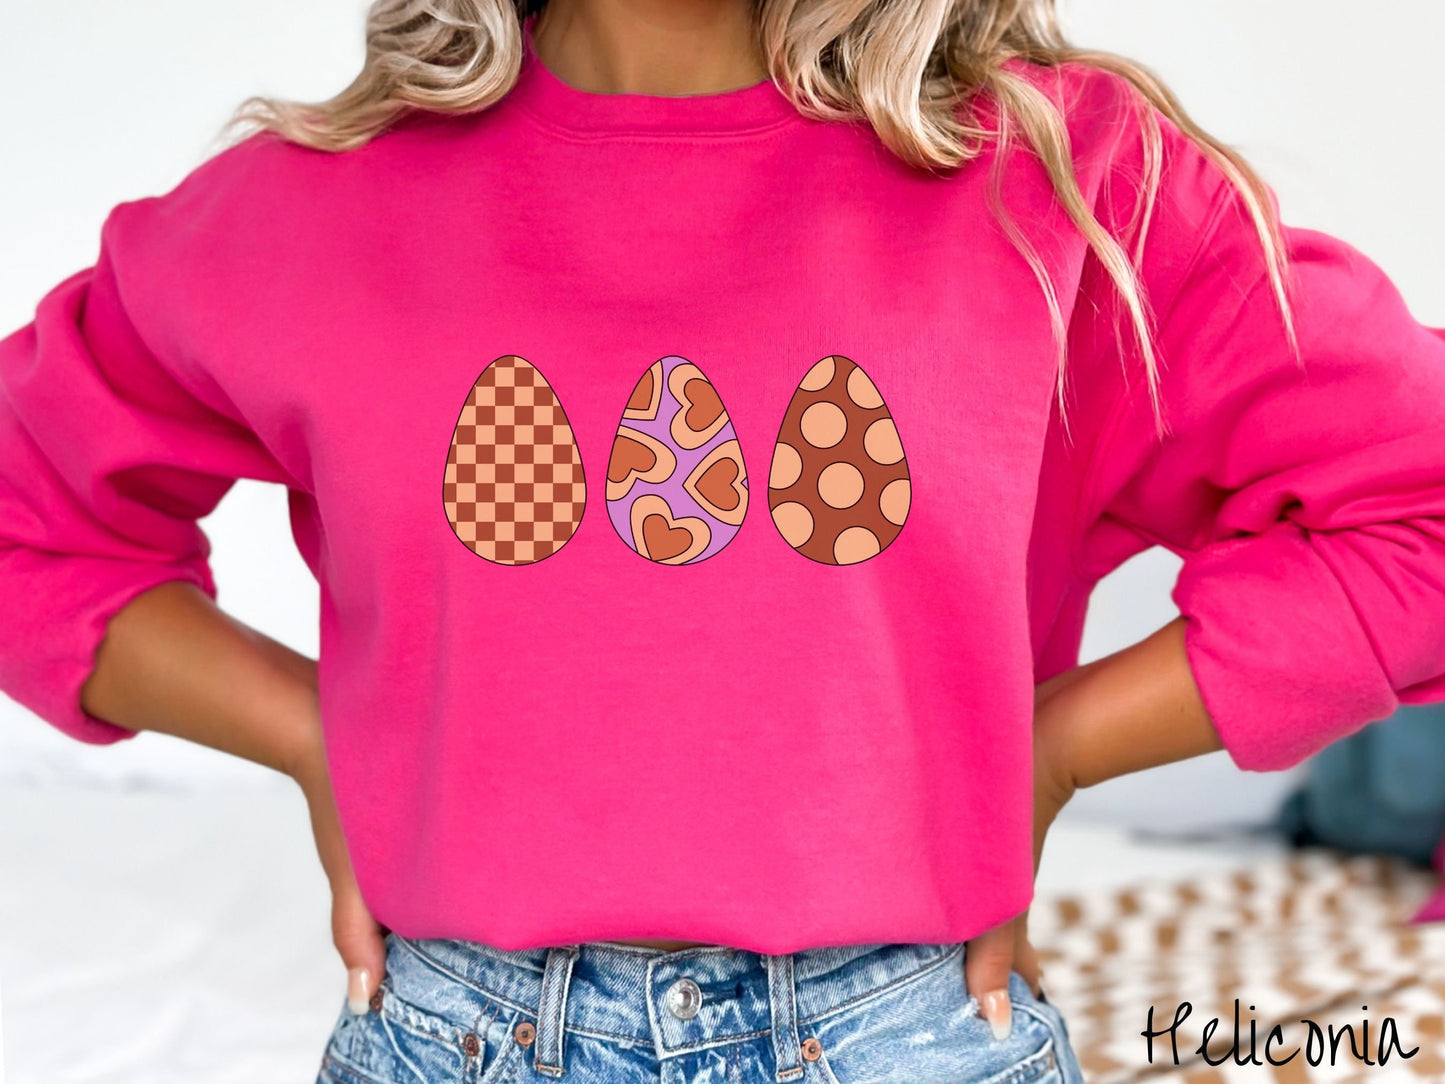 A woman wearing a cute, vintage heliconia colored sweatshirt with three Easter eggs. The left has a light yellow and brown checkerboard pattern, the middle is purple with light yellow brown hearts, and the right is brown with light yellow circles.